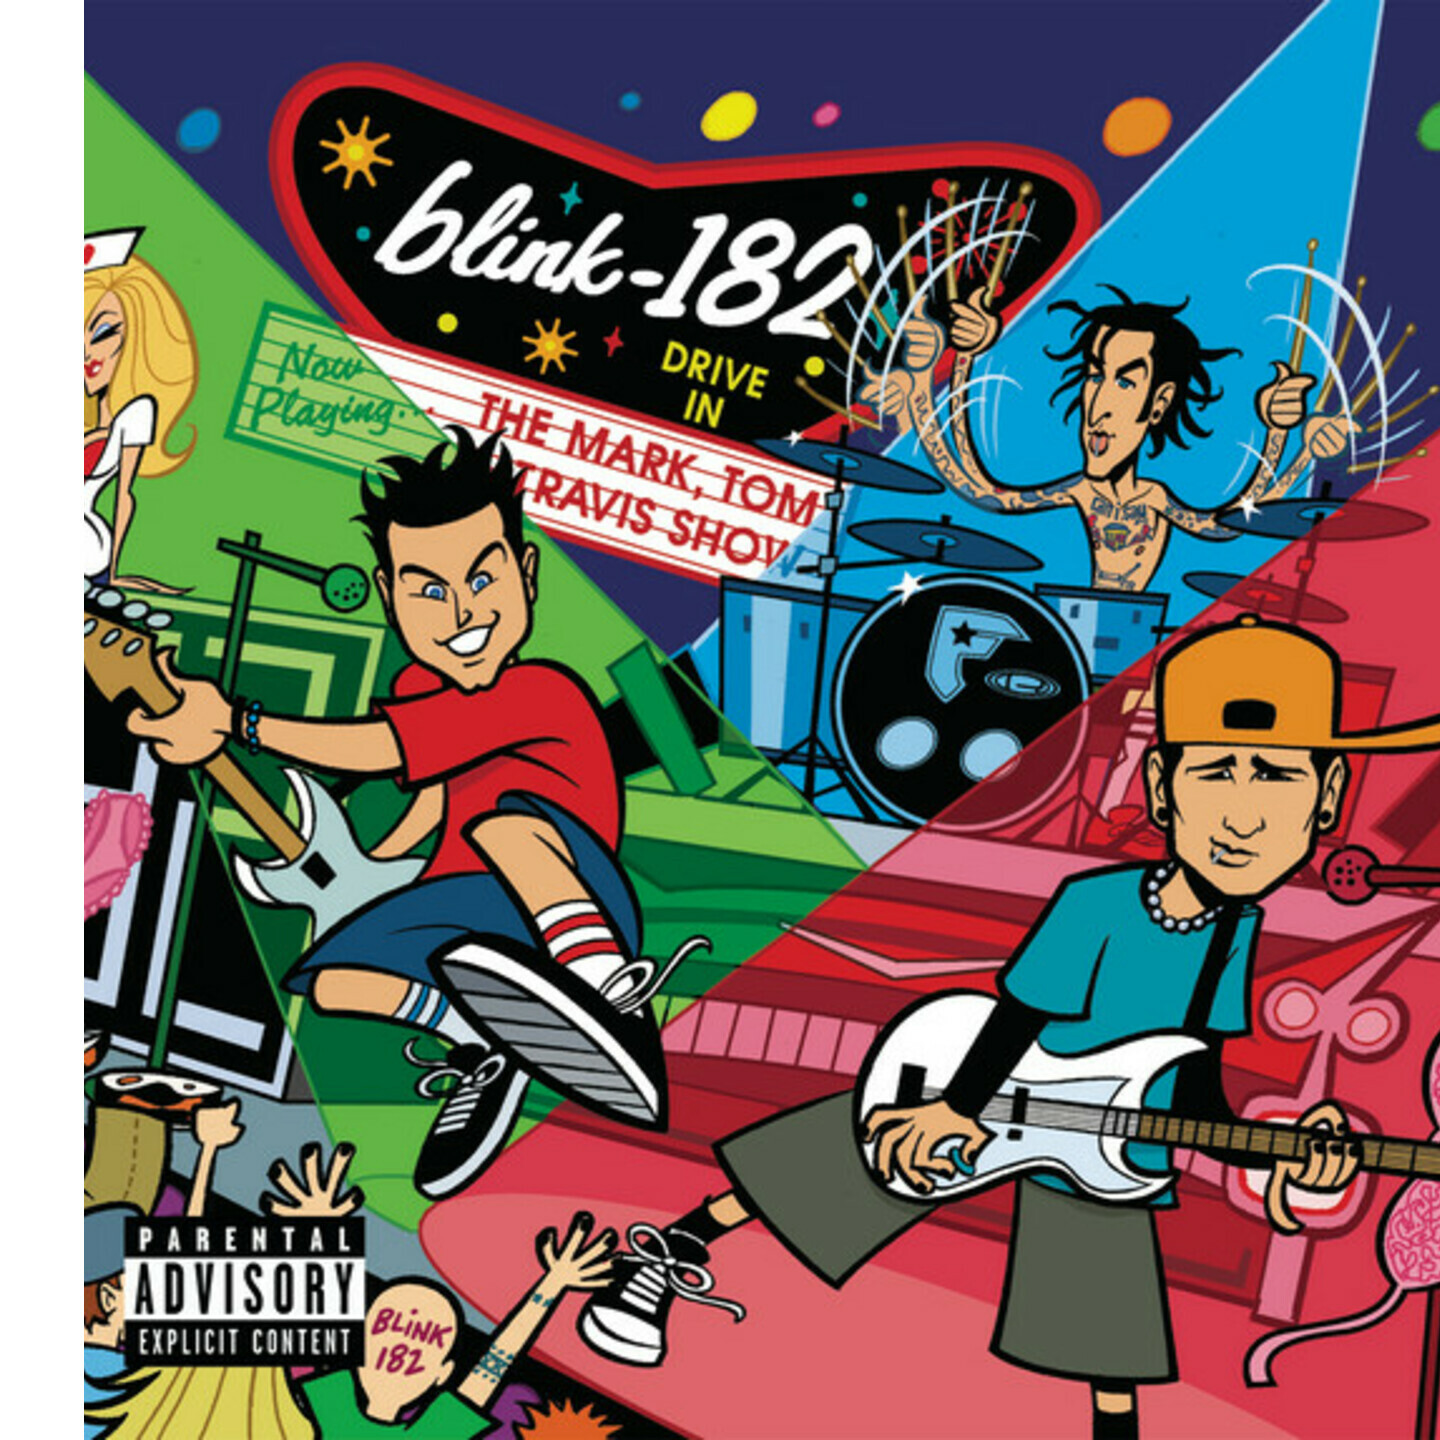 BLINK-182 - The Mark, Tom, And Travis Show 2xLP